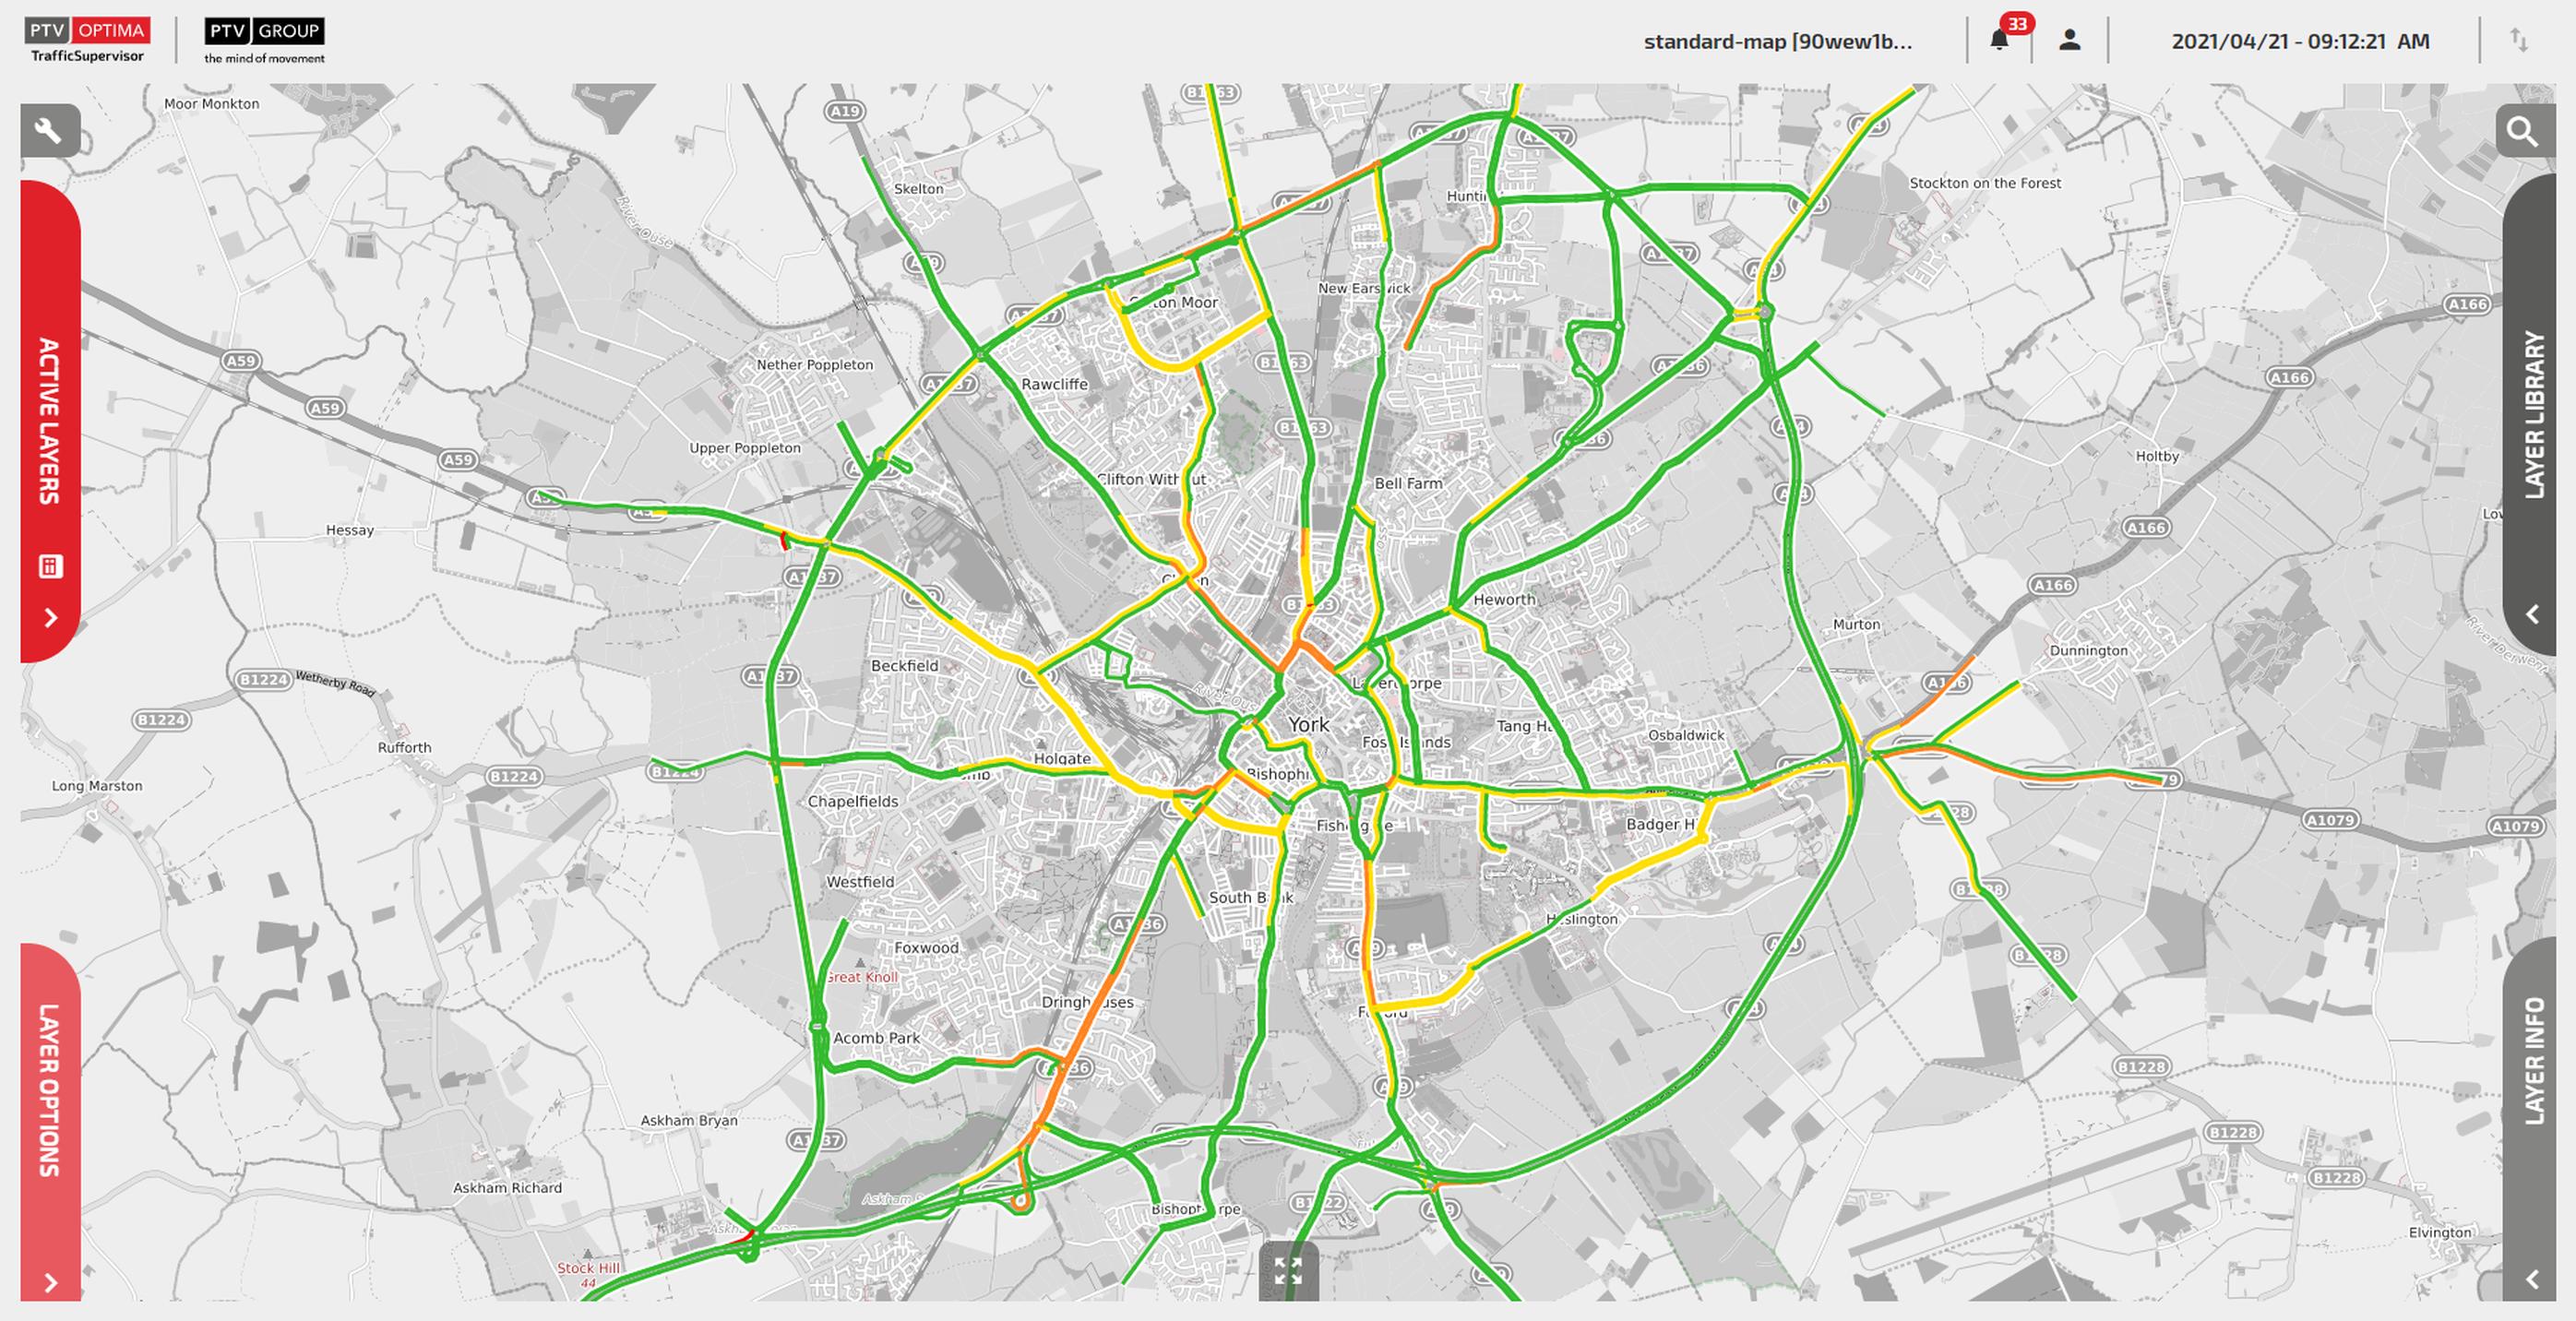 TomTom live speed data is mapped to the York Optima network in real-time and provides a key input to the models. TomTom were selected to be the provider of live empirical speed data which is pulled directly by PTV Optima and mapped in real-time to the York network, providing an additional layer of information for the real-time models